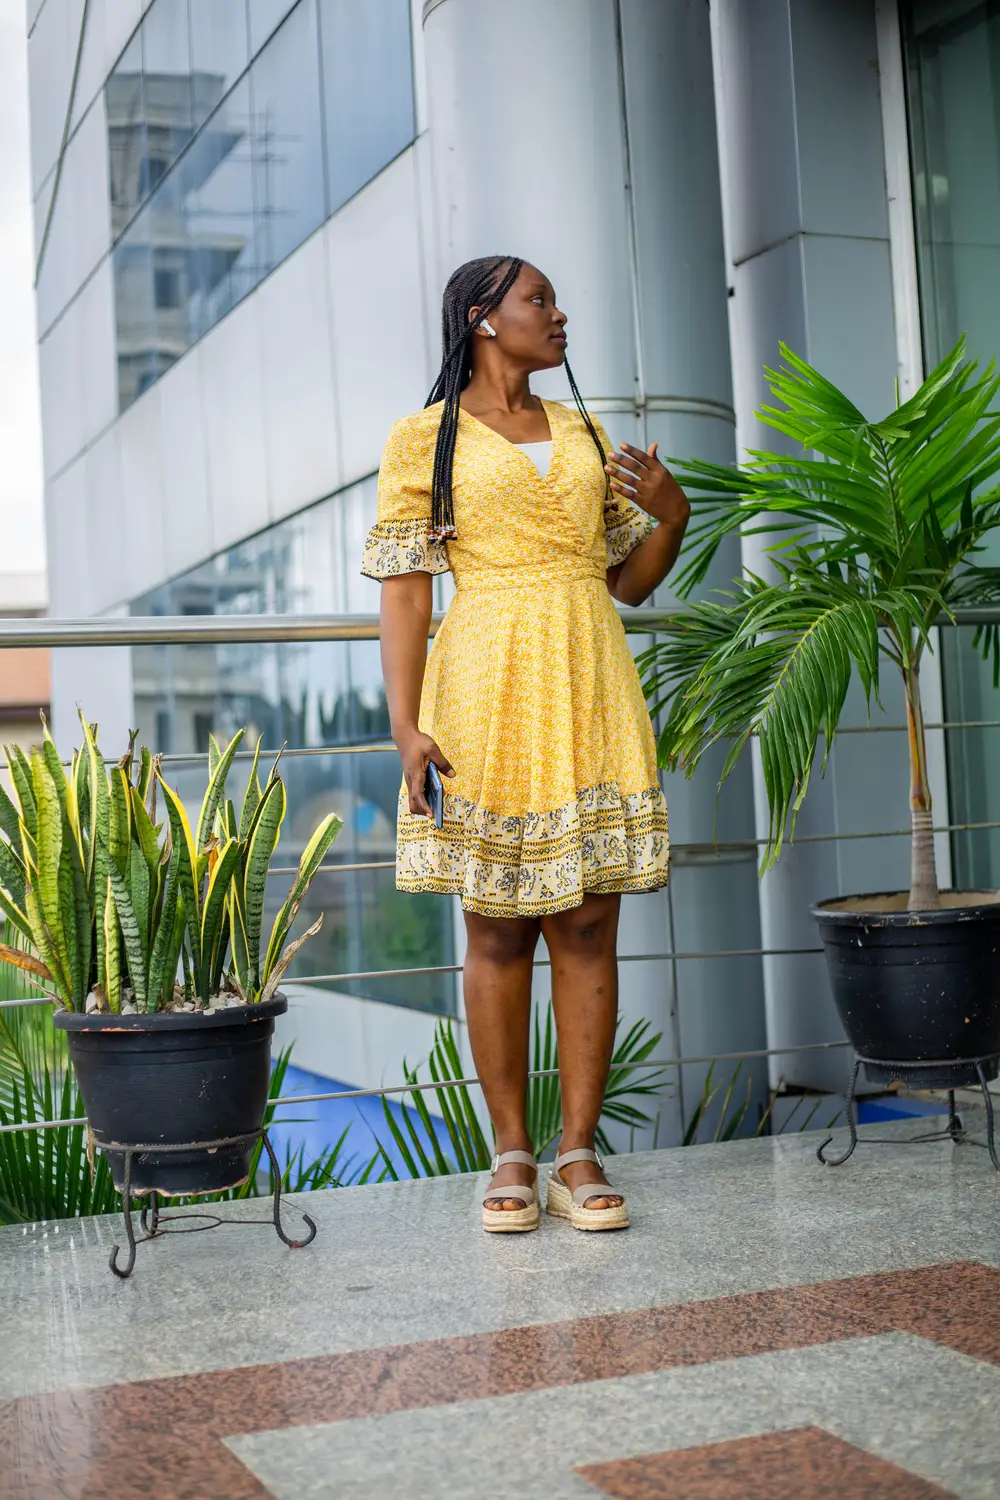 a woman on a yellow dress stands and looks away